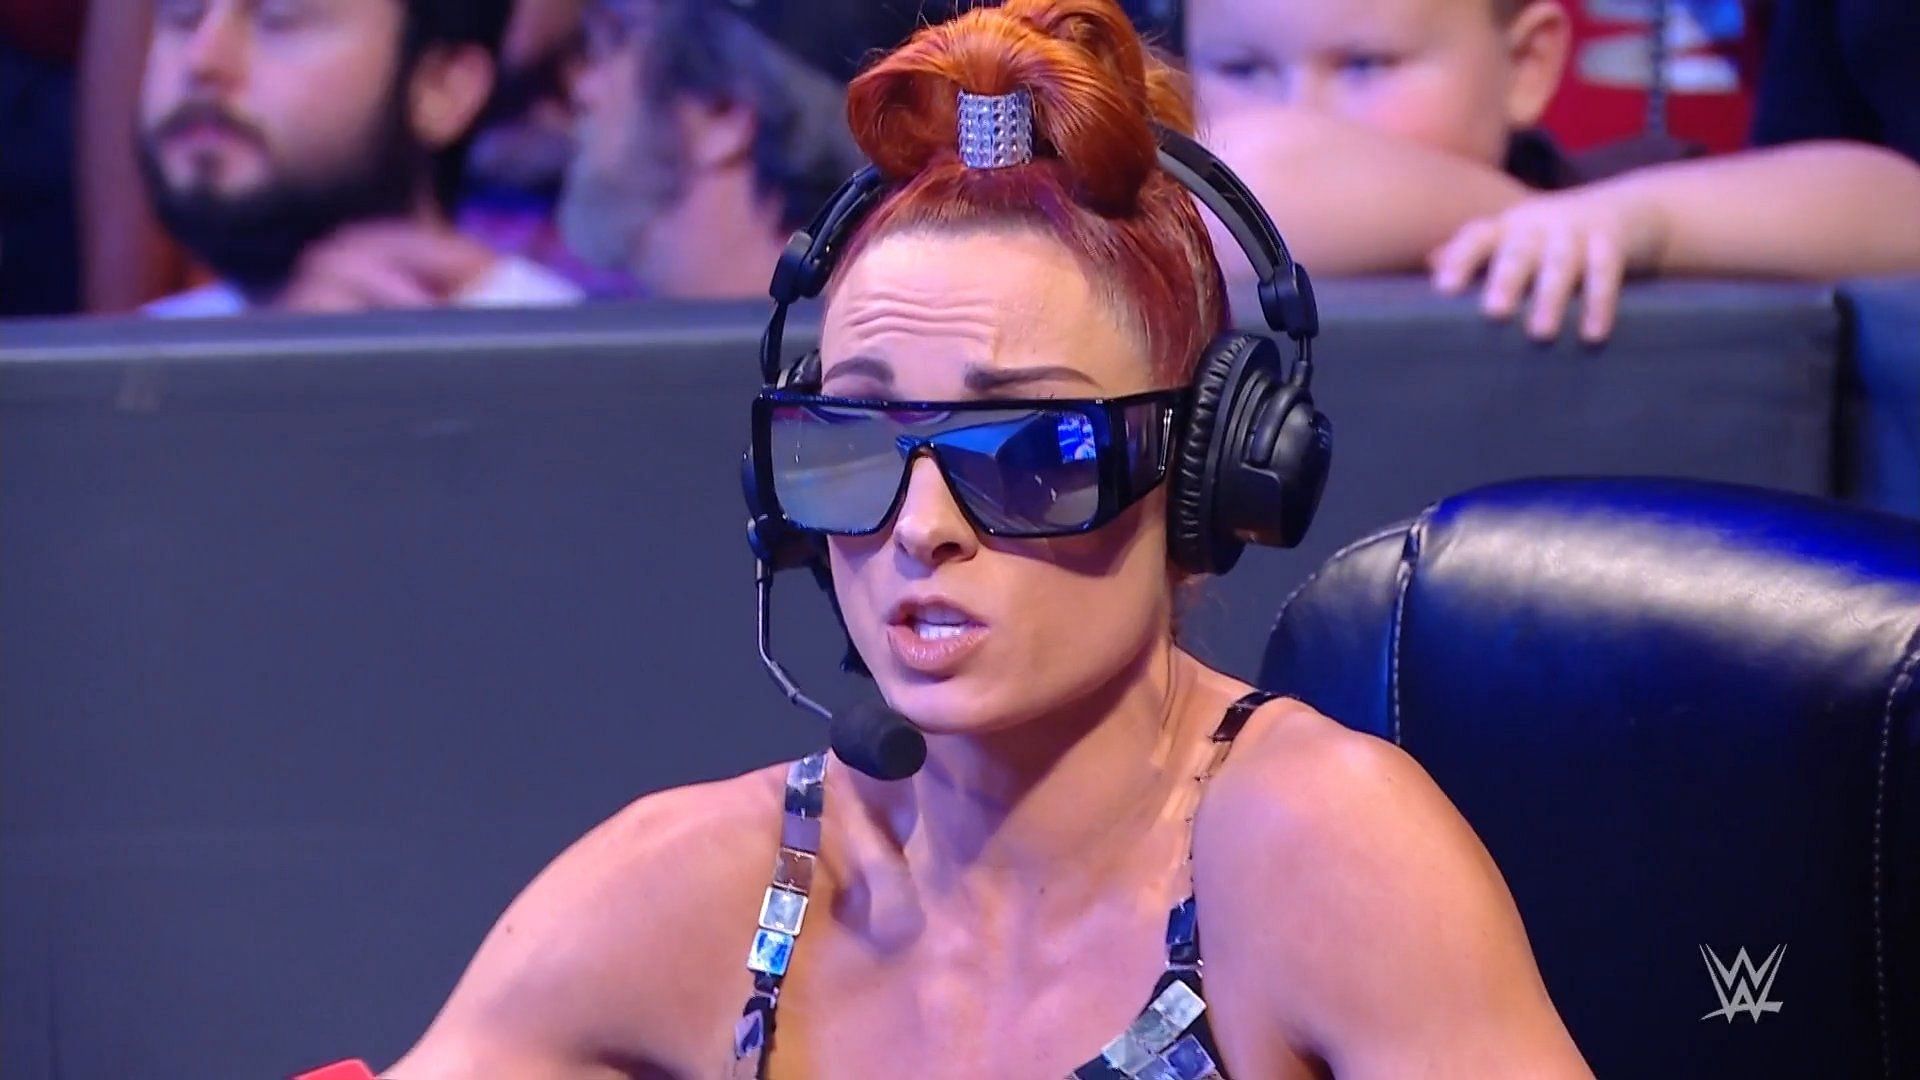 Becky Lynch successfully retained her title at WWE Day 1